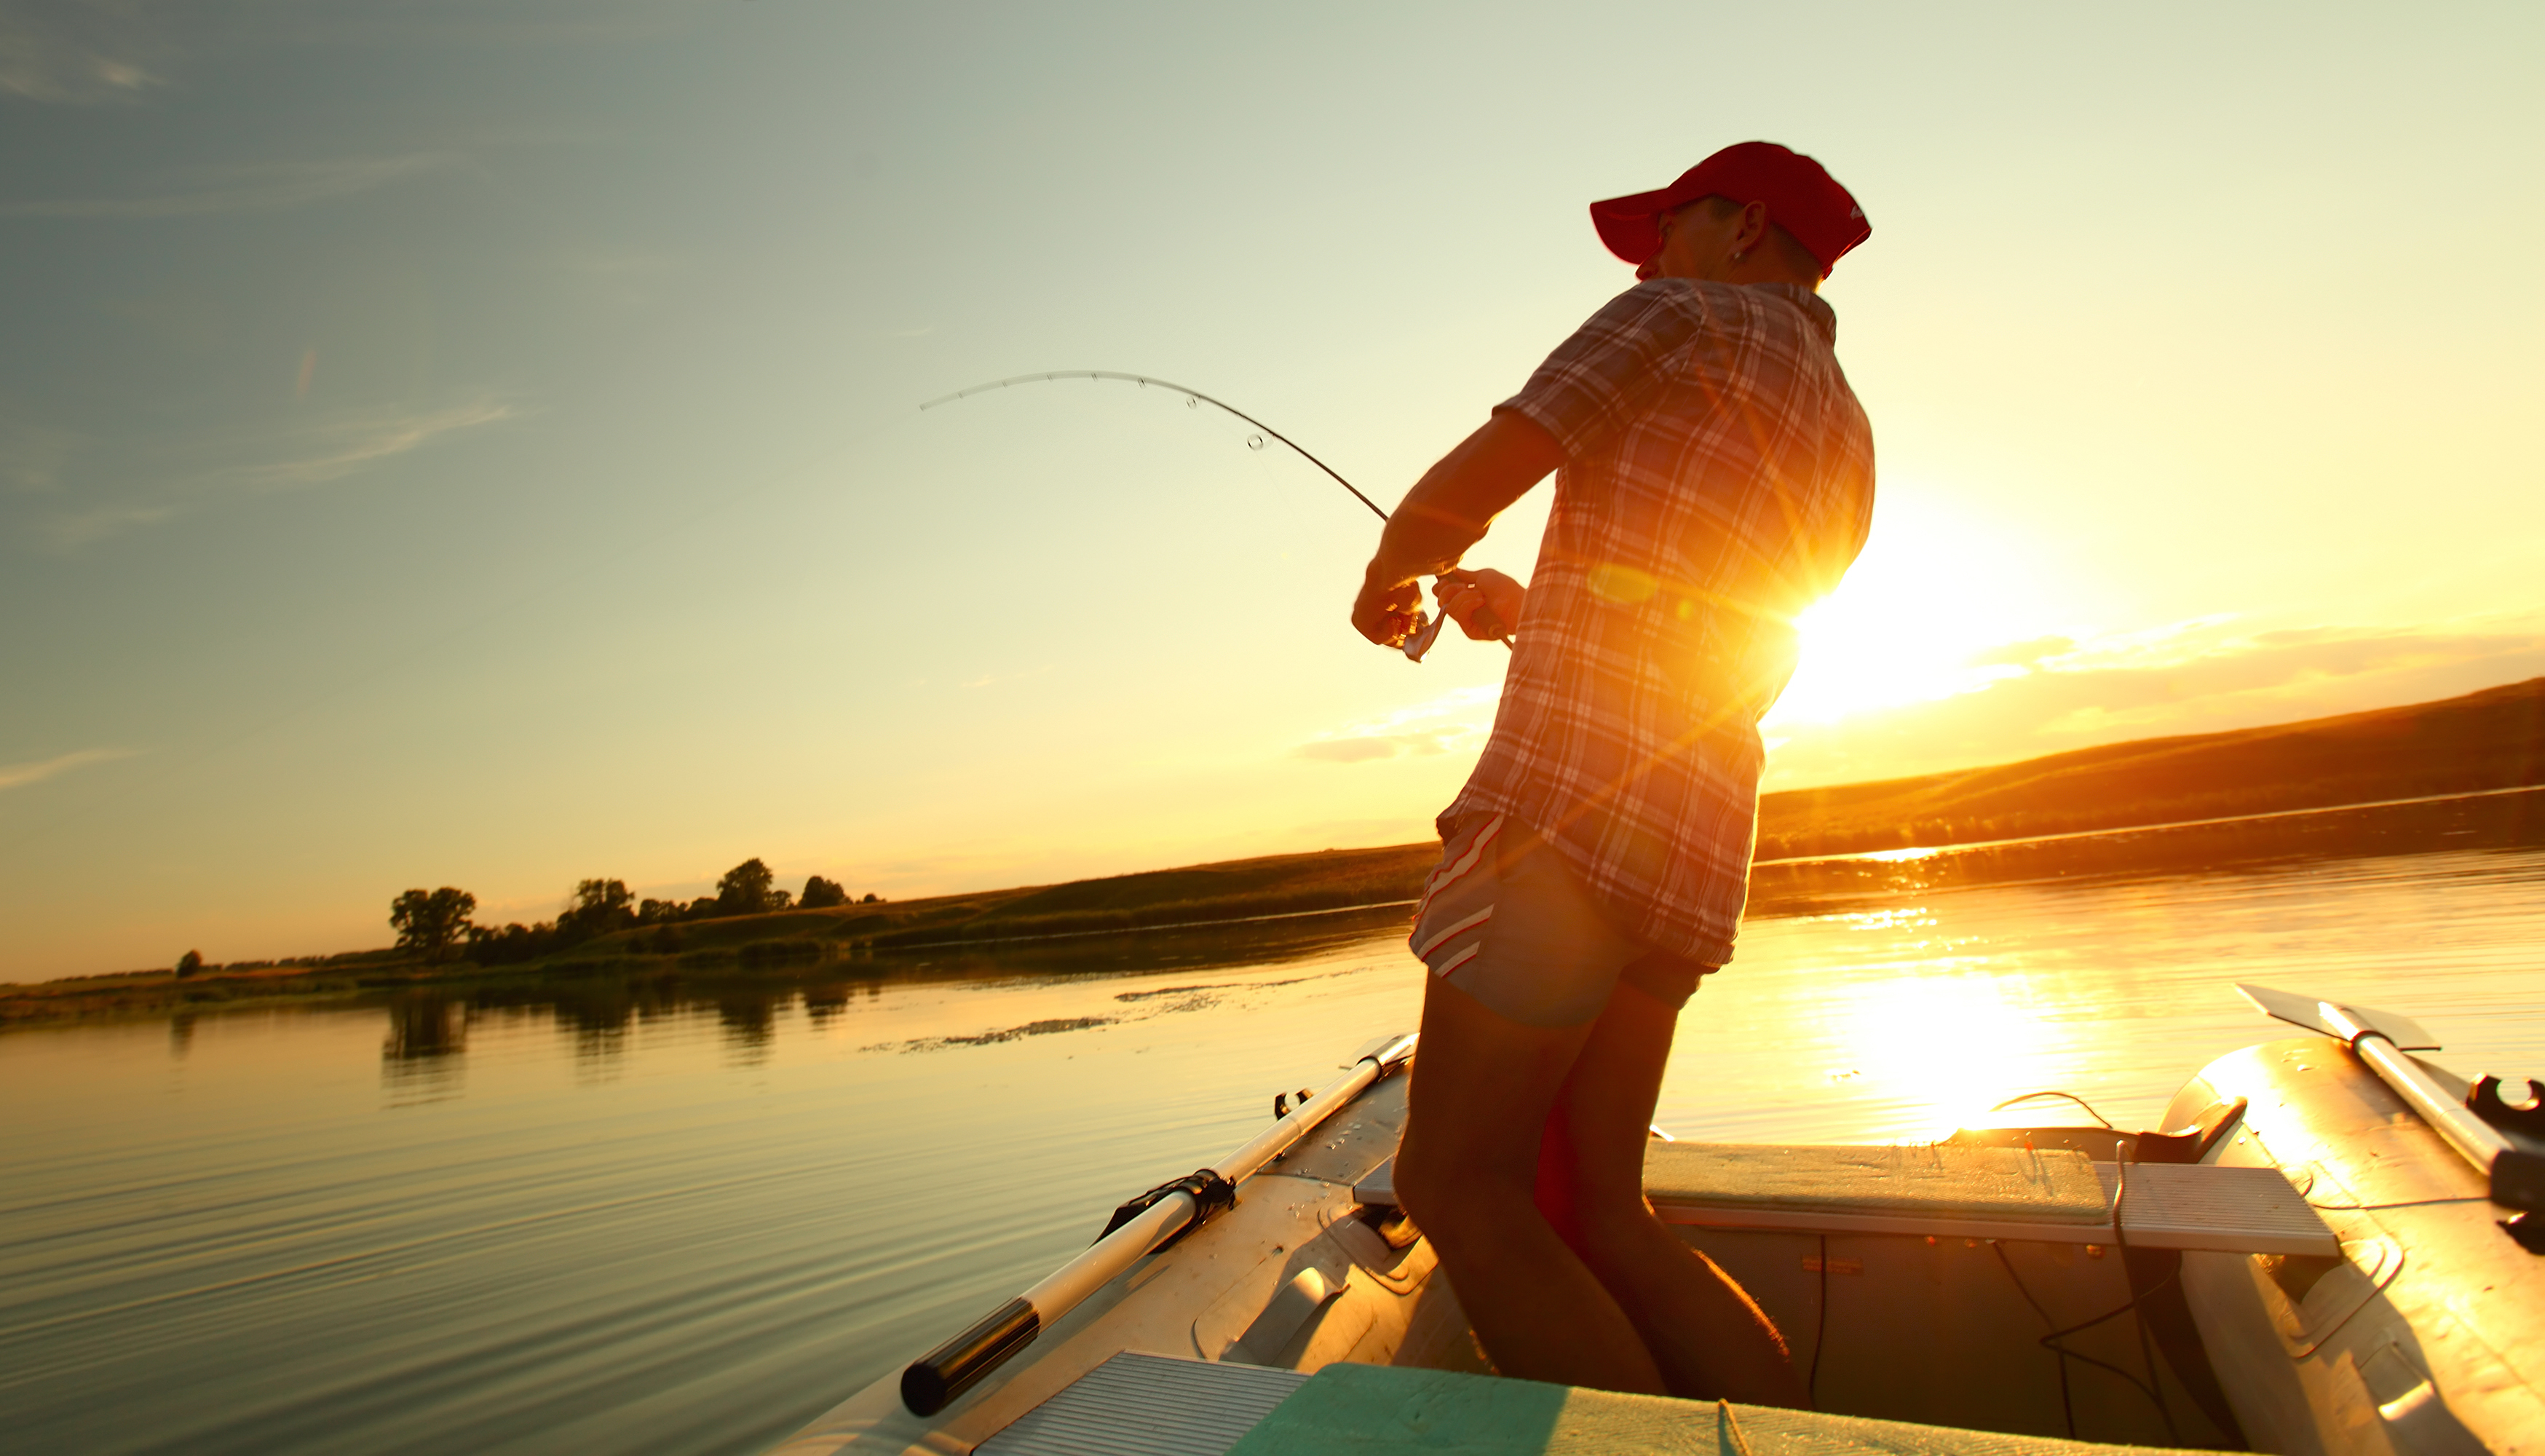 A fisherman reels in a fish while on a boat, striper fishing concept. 